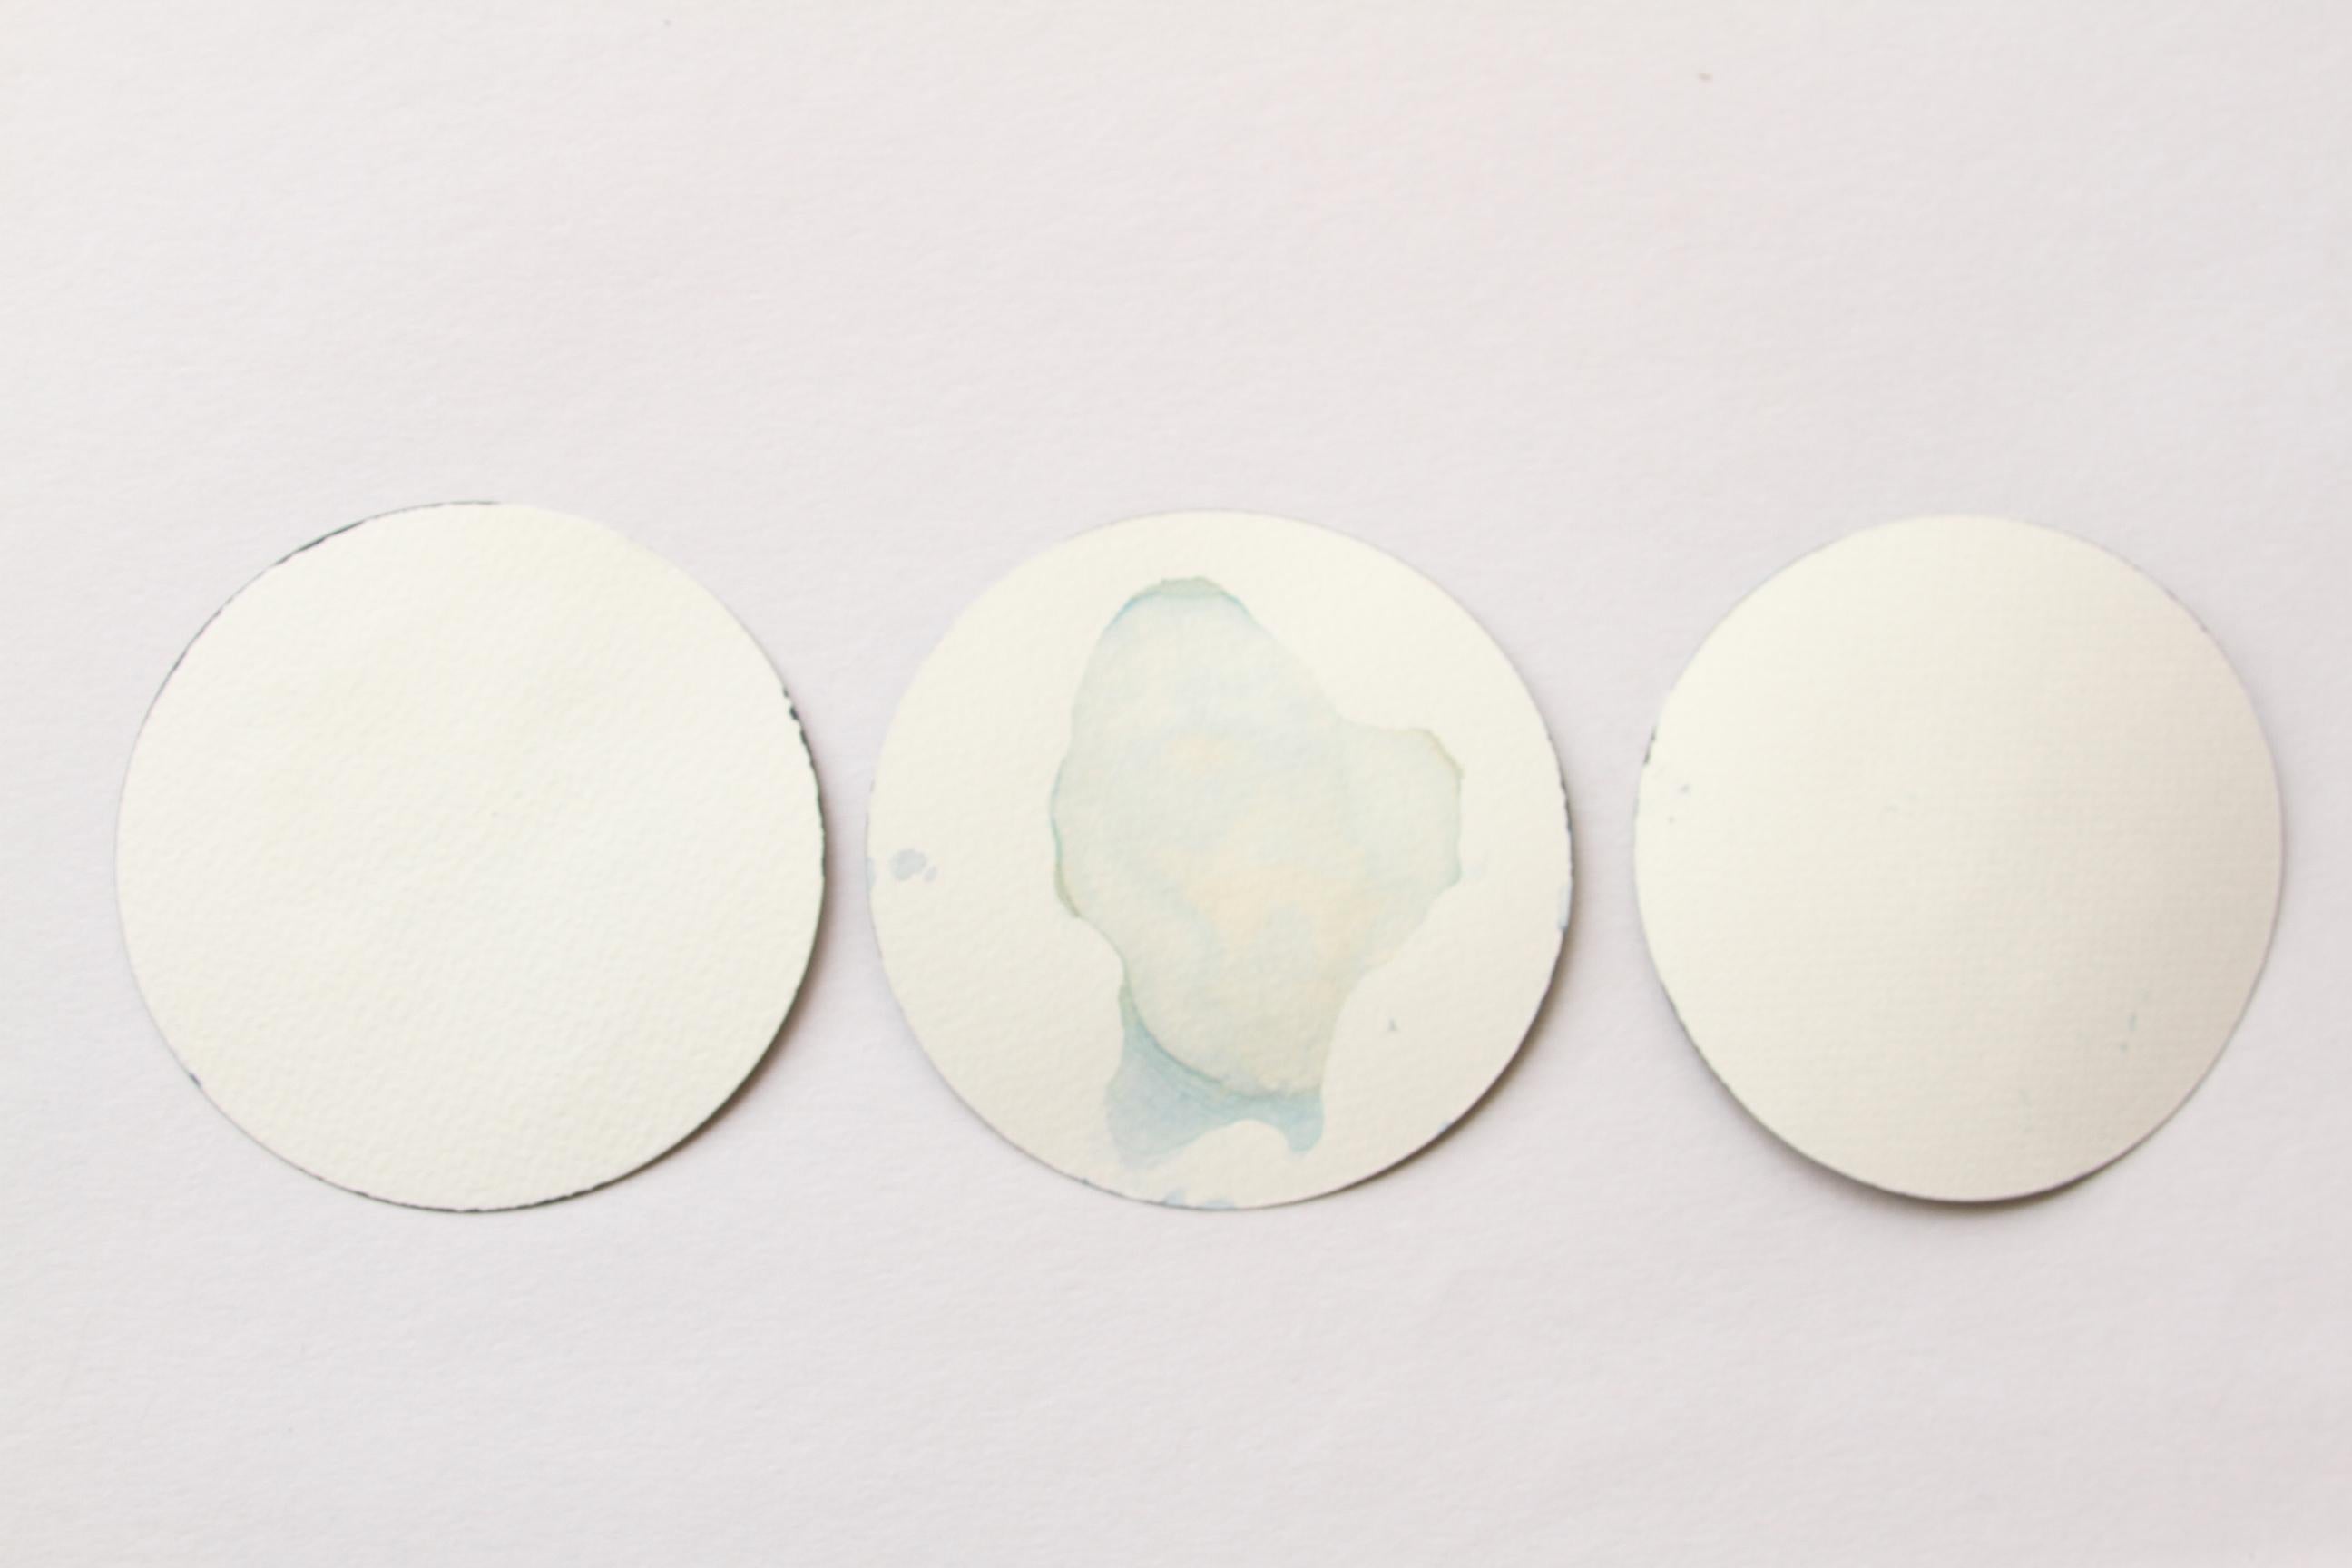 Algas 23, 63 y 64. Cyanotype photograhs mounted in high resistance glass dish For Sale 2